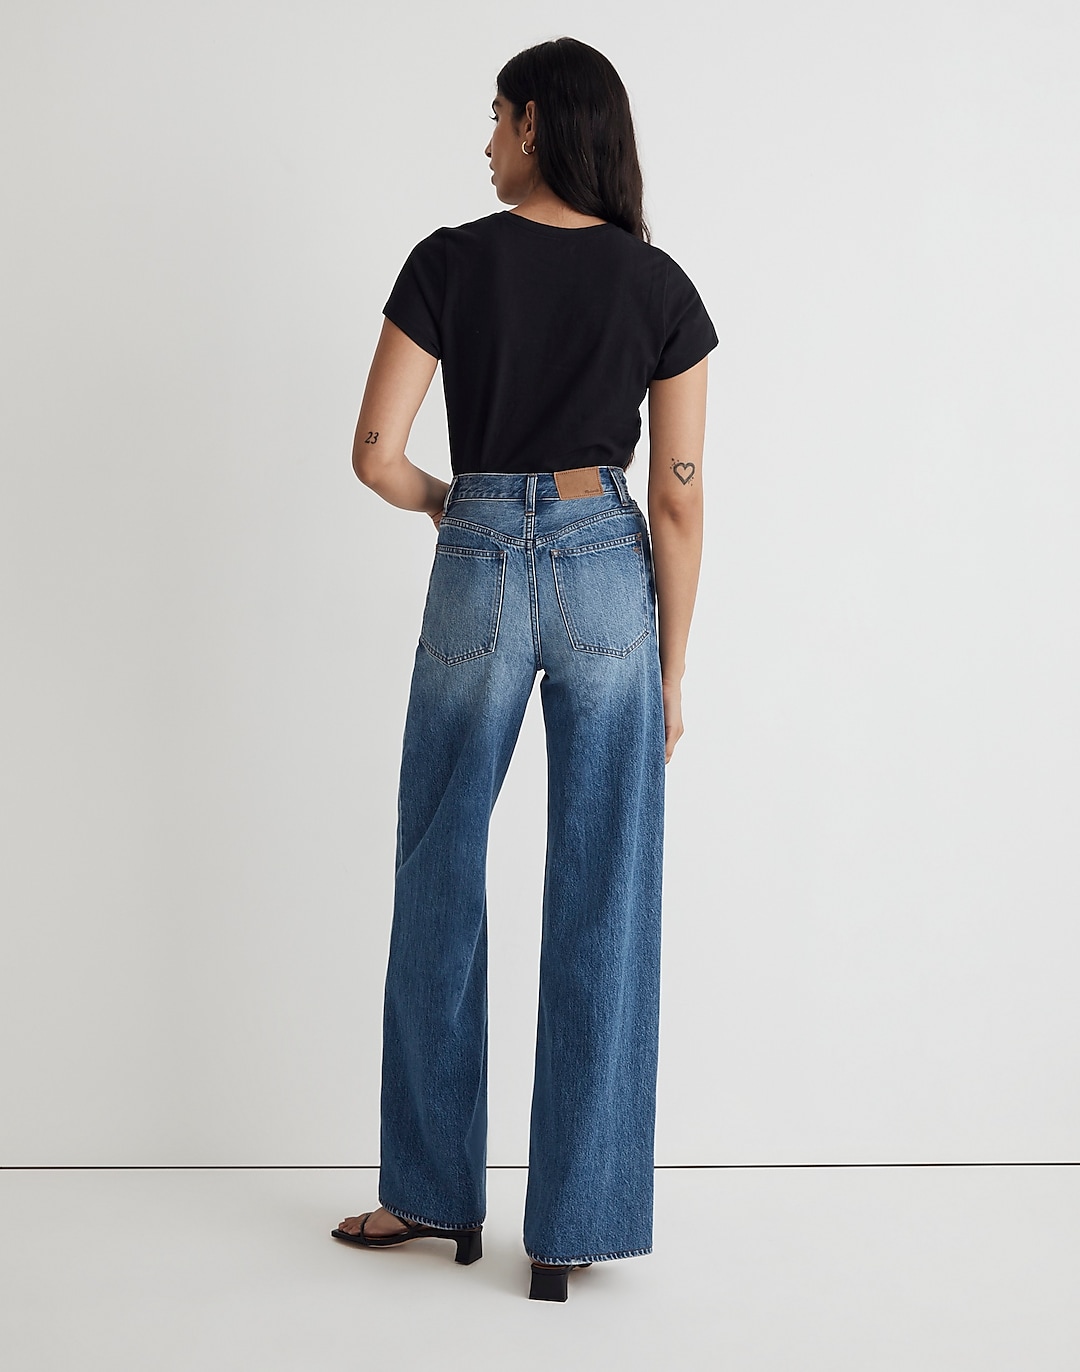 Superwide-Leg Jeans | Madewell